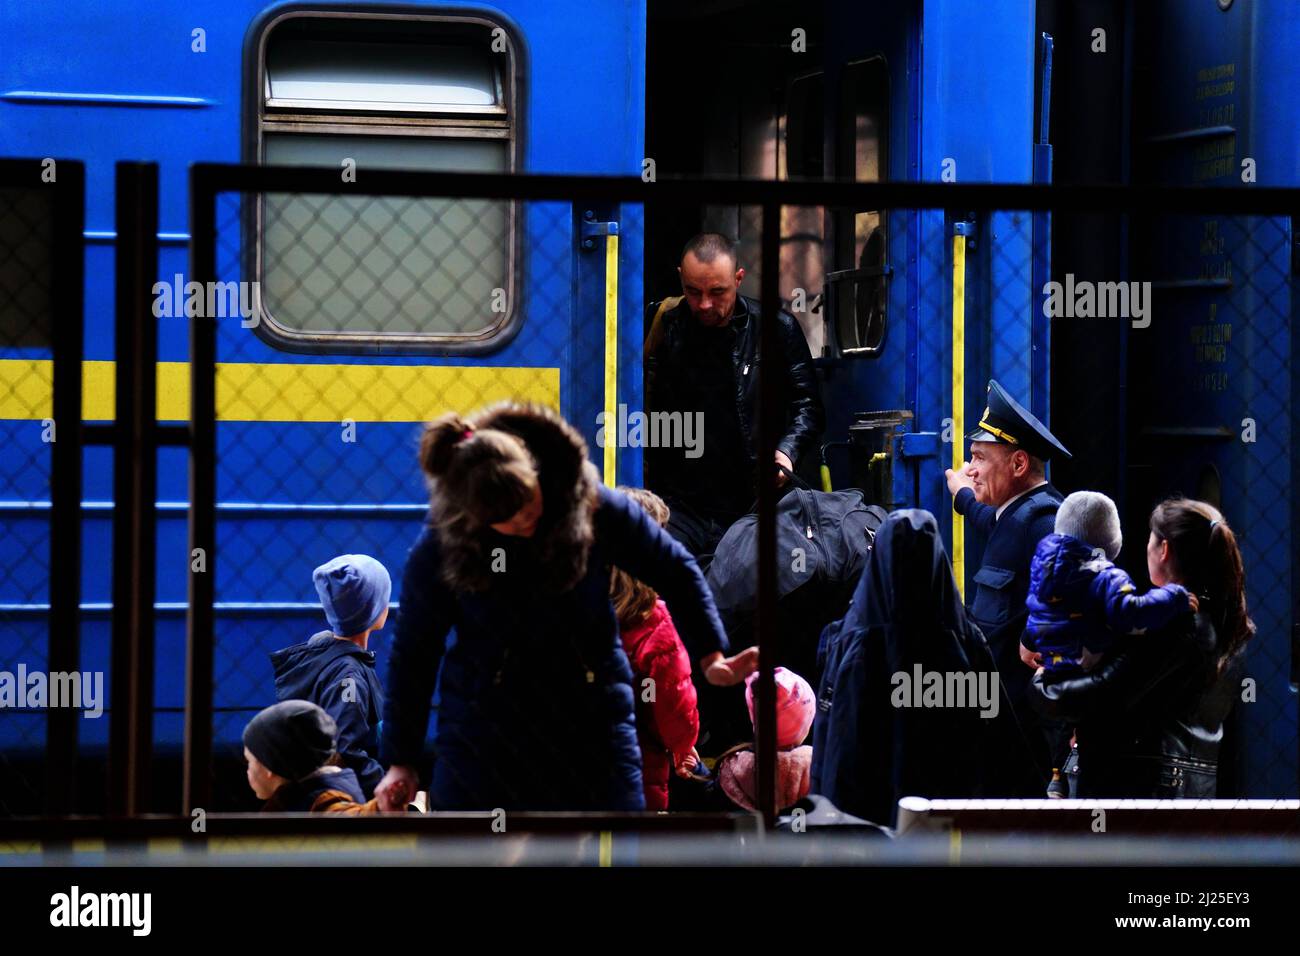 A Ukrainian family disembarks a train at Przemysl Glowny train station in Poland, after arriving by train from Ukraine to flee the Russian invasion. Picture date: Tuesday March 29, 2022. Stock Photo